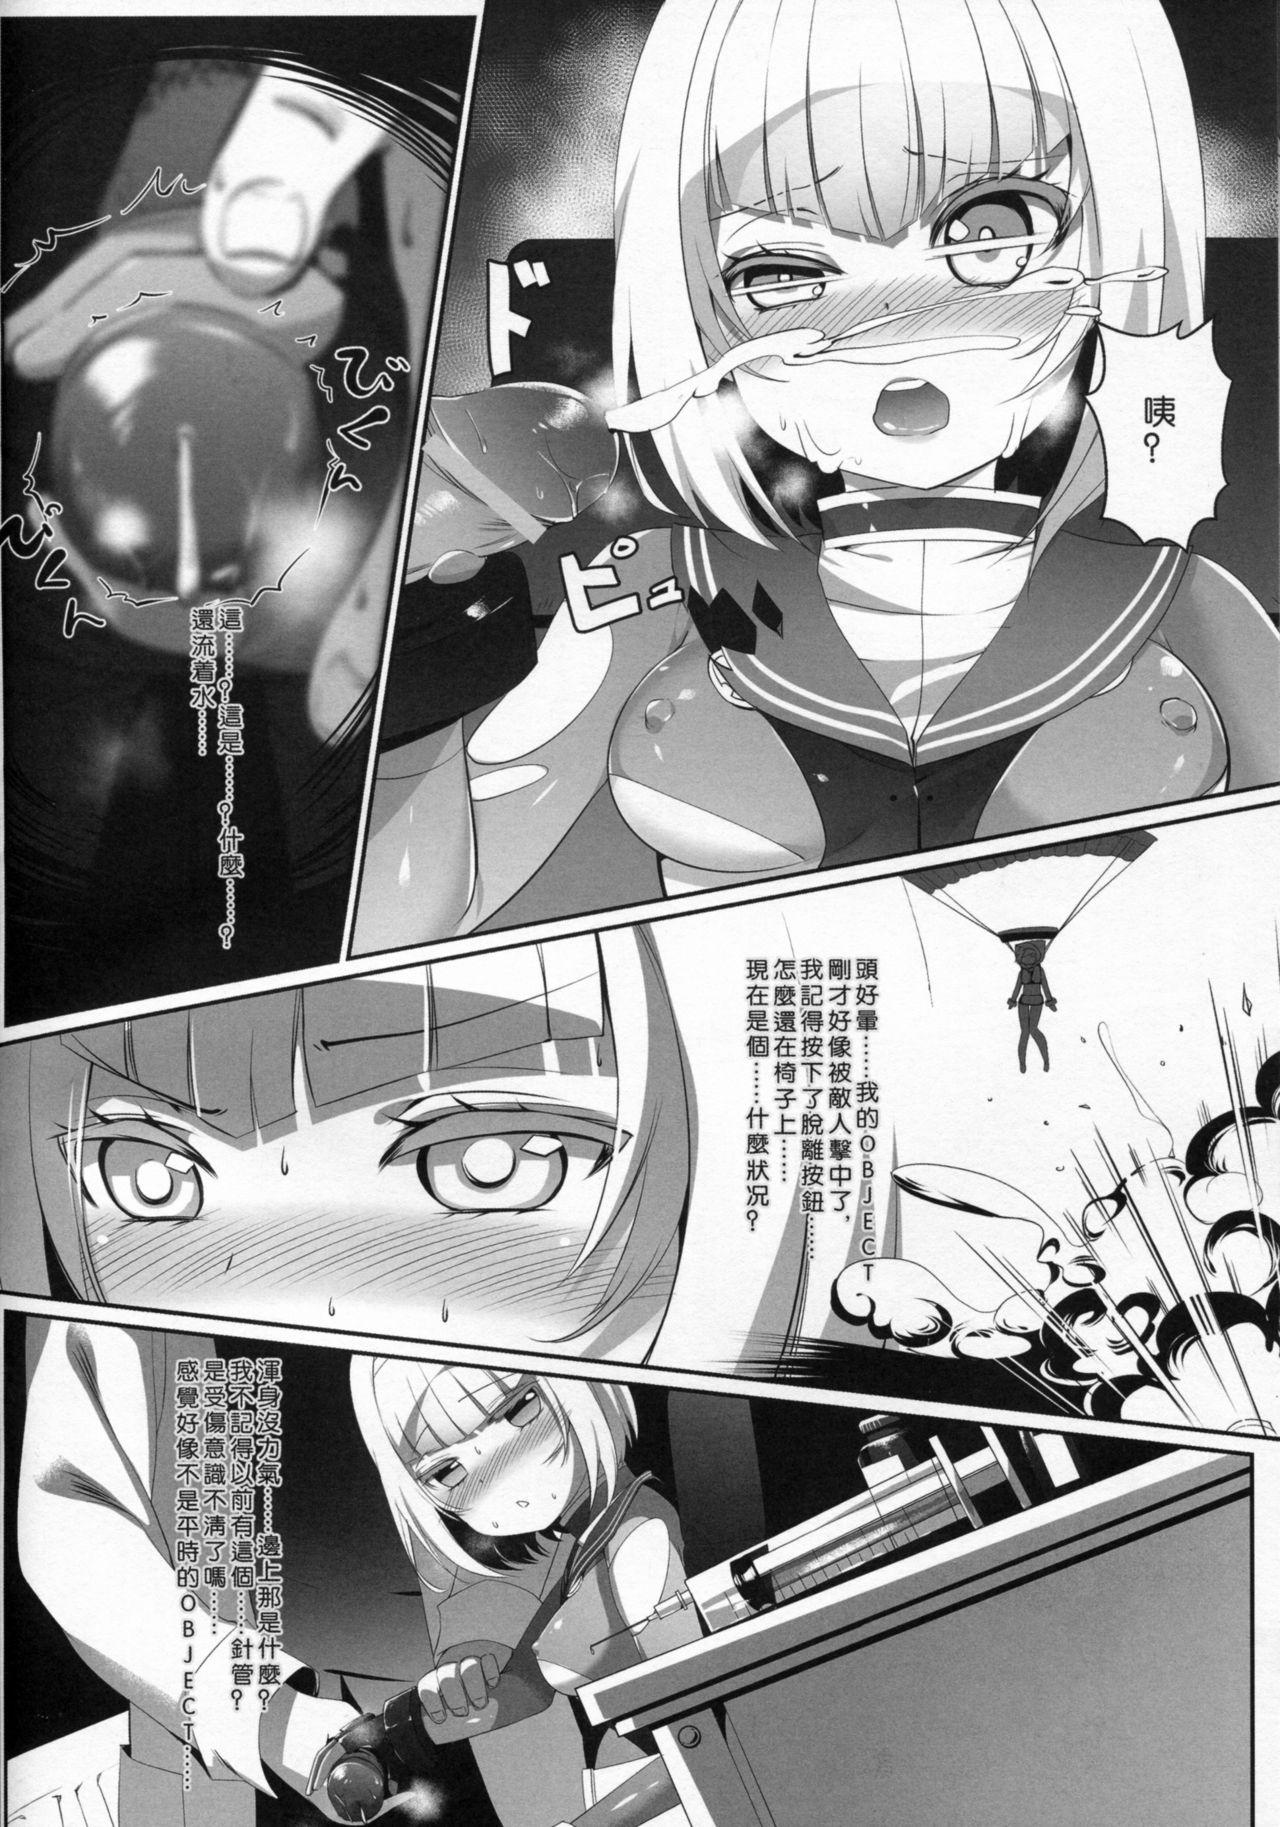 Teamskeet Heavy Dominated - Heavy object 1080p - Page 3